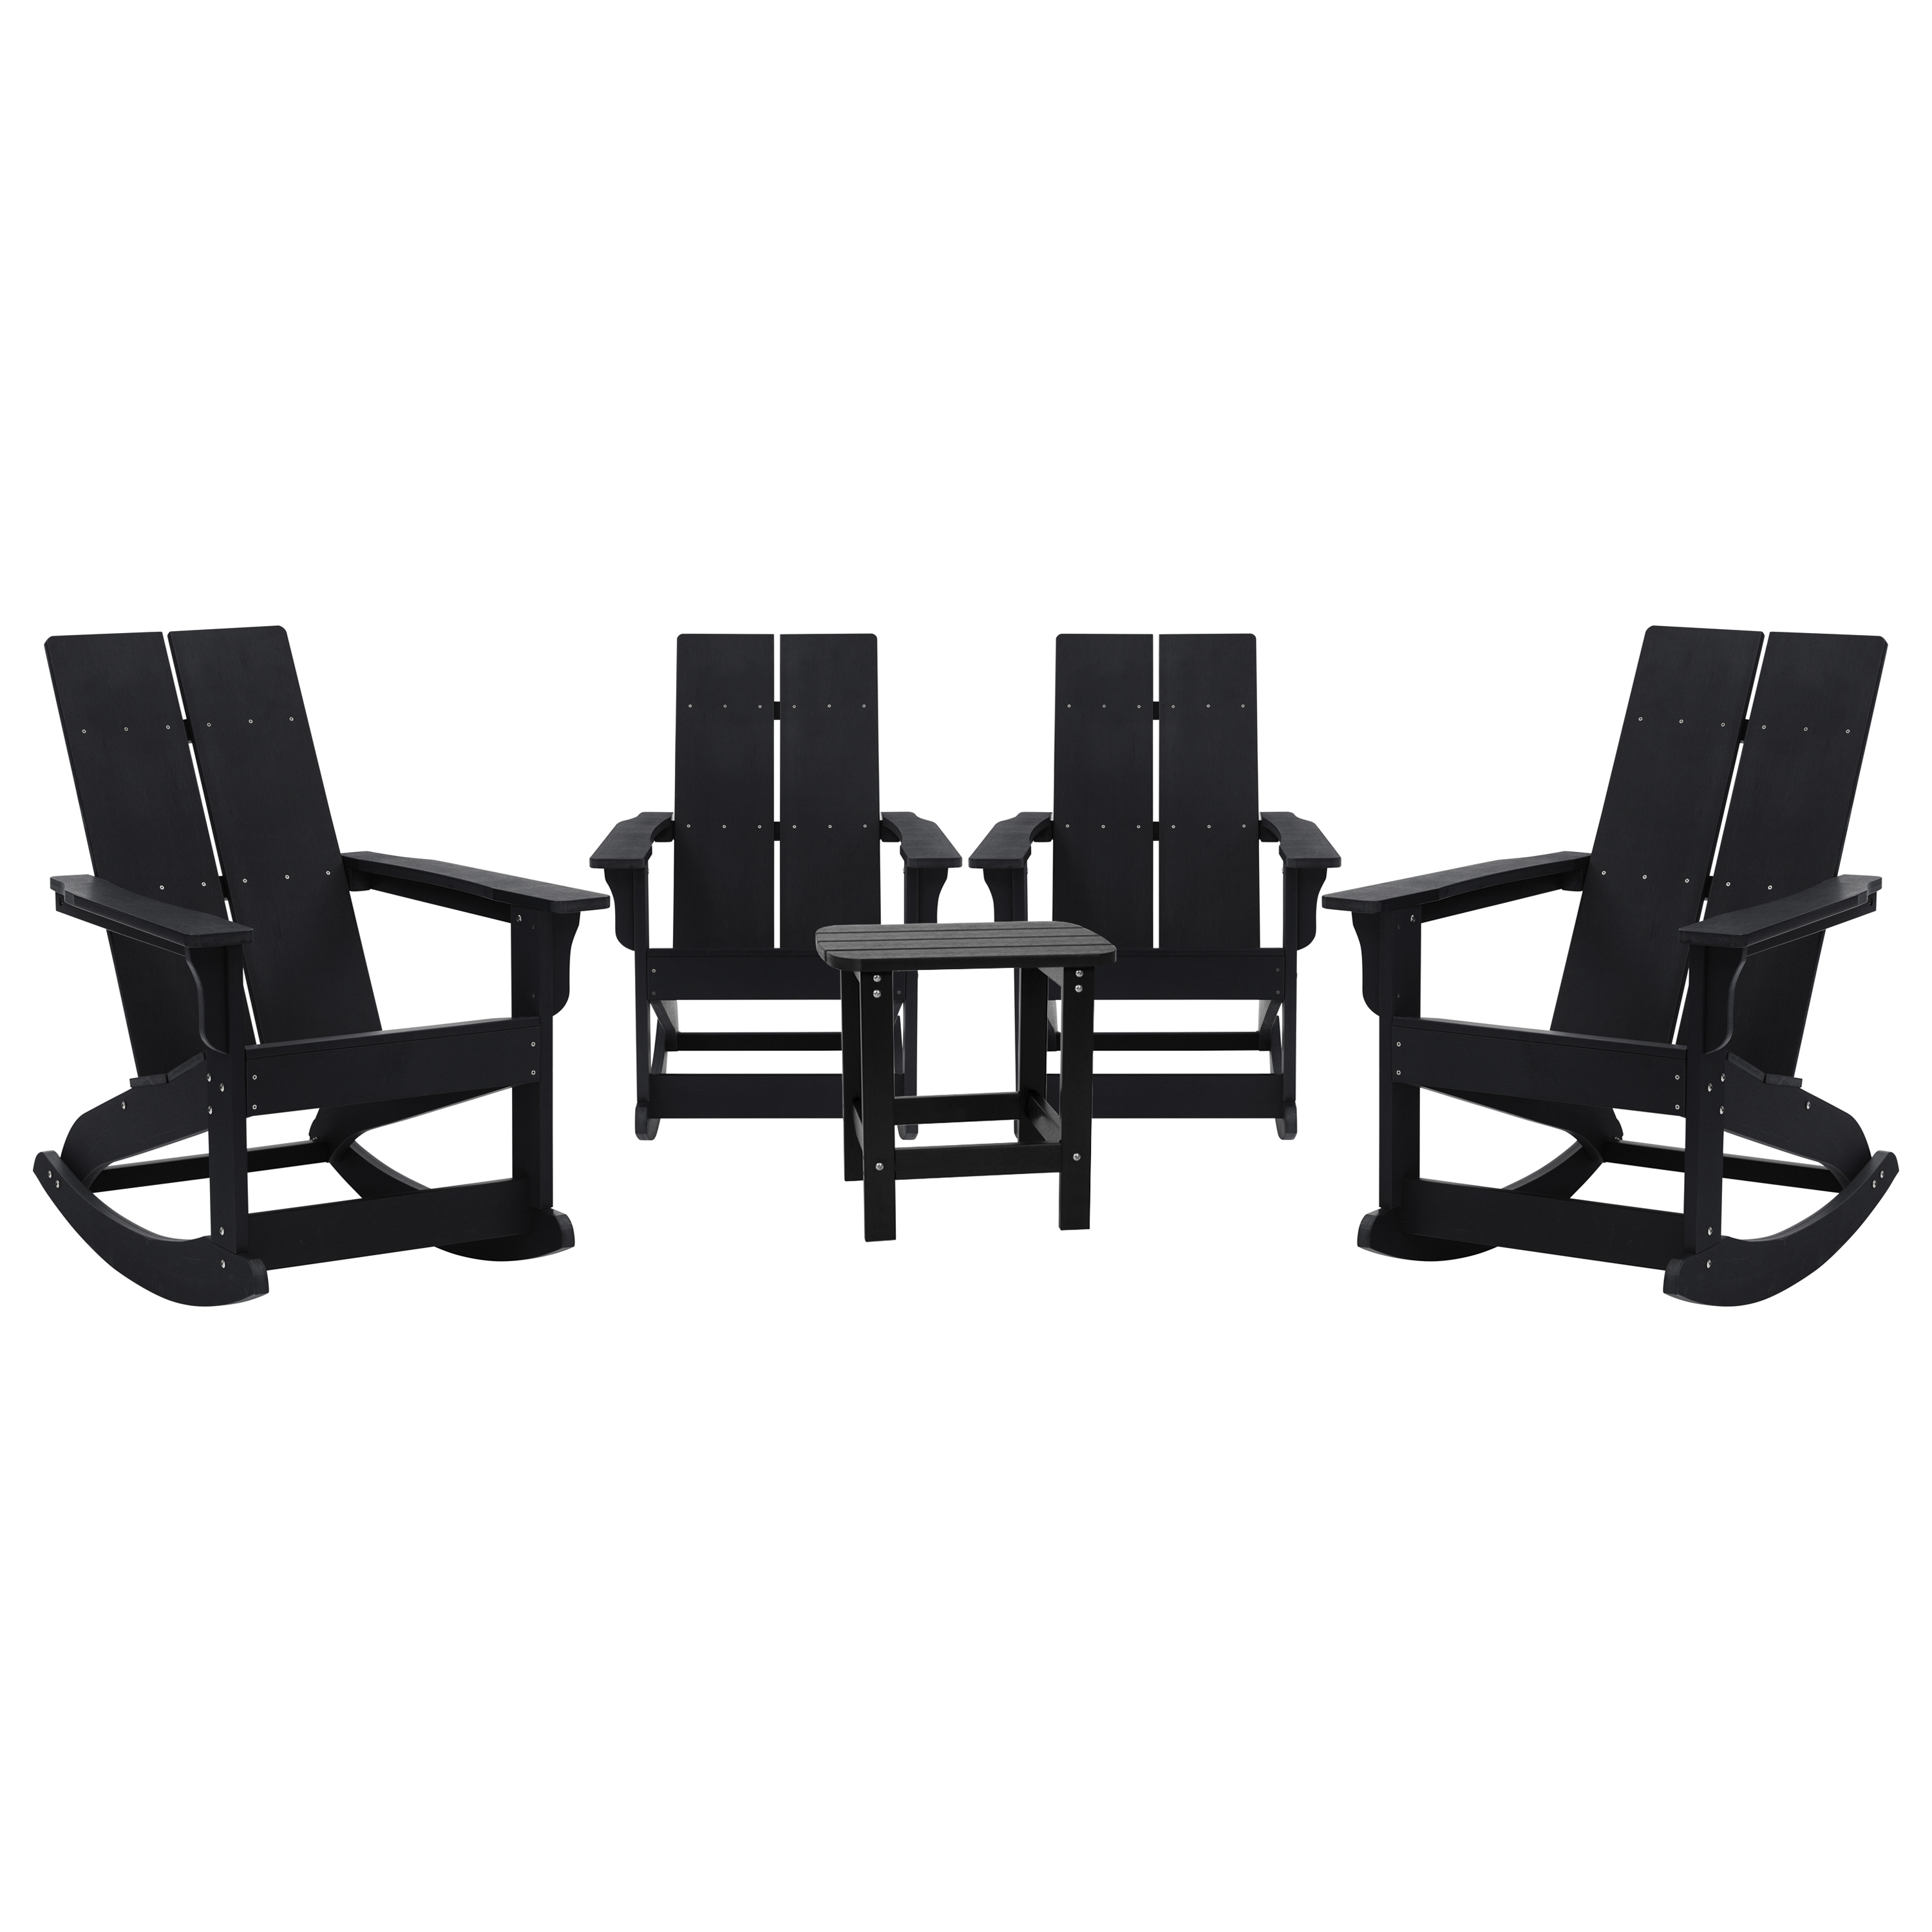 Flash Furniture JJ-C14709-4-T14001-BK-GG Black Modern All-Weather 2-Slat Poly Resin Rocking Adirondack Chair with Side Table, Set of 4